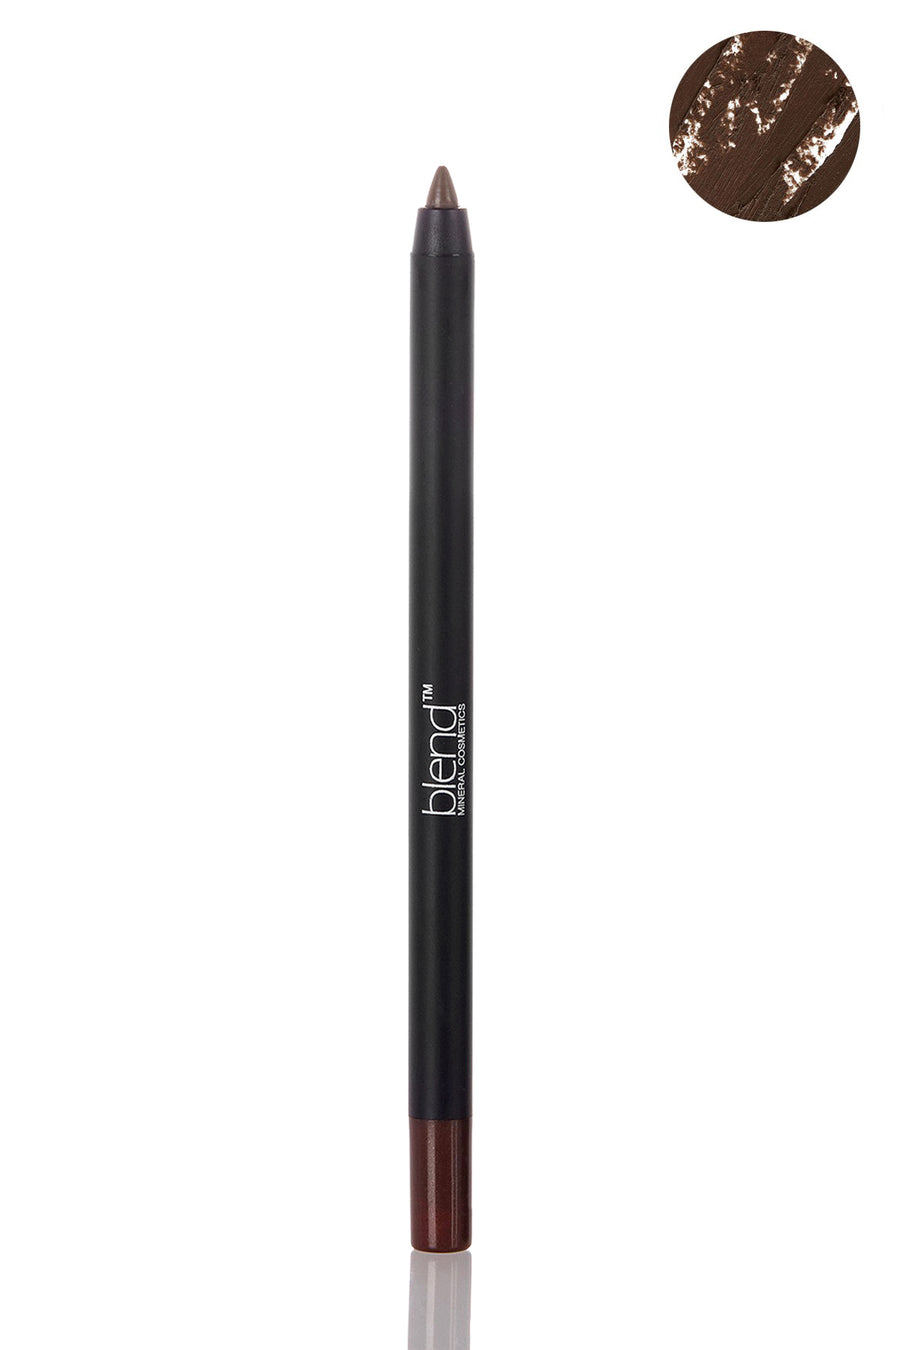 Waterproof Long Lasting Pencil - Taupe - Blend Mineral Cosmetics